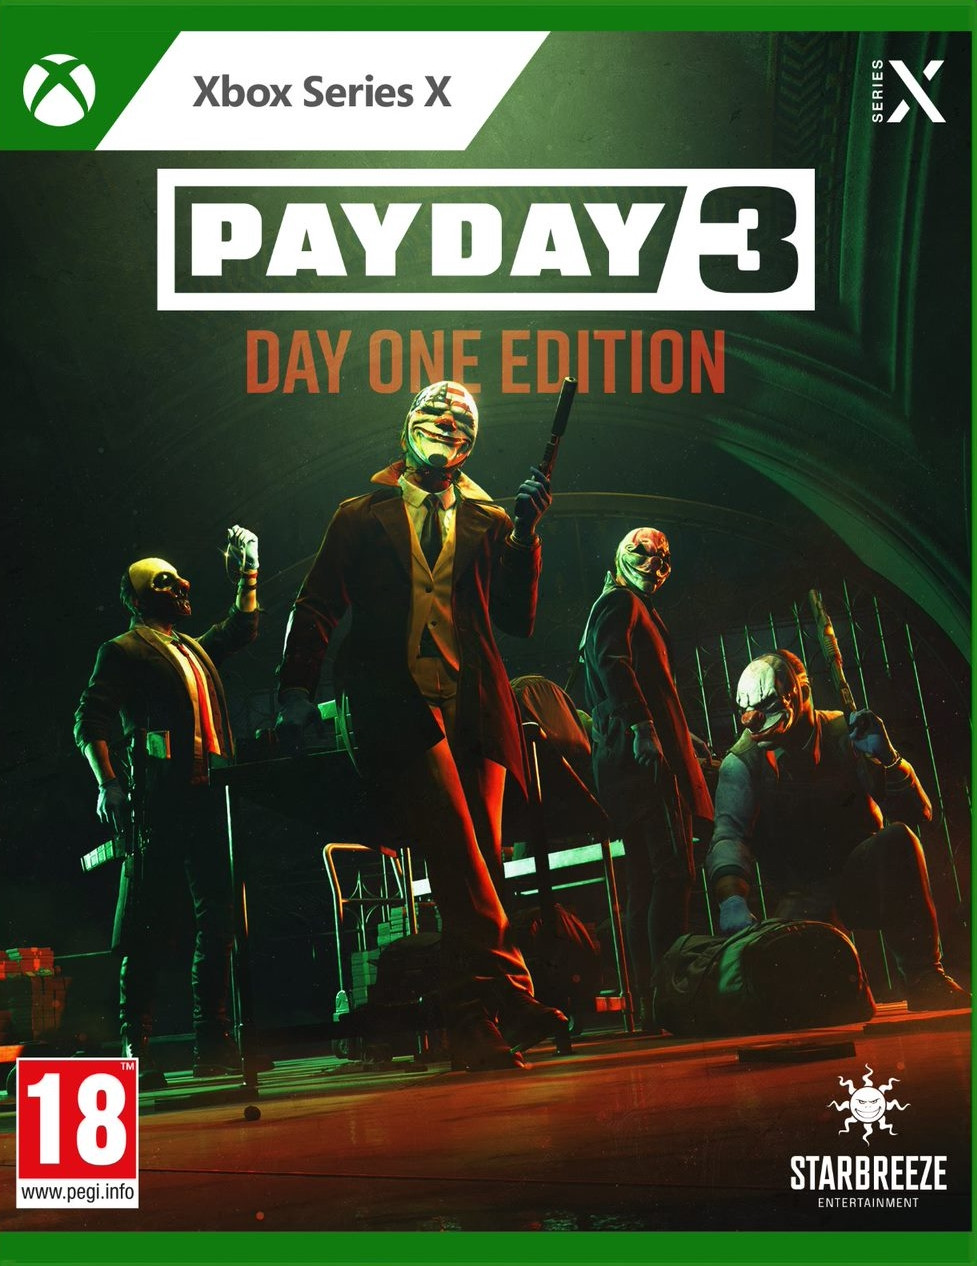 Deep Silver Payday 3 Day One Edition